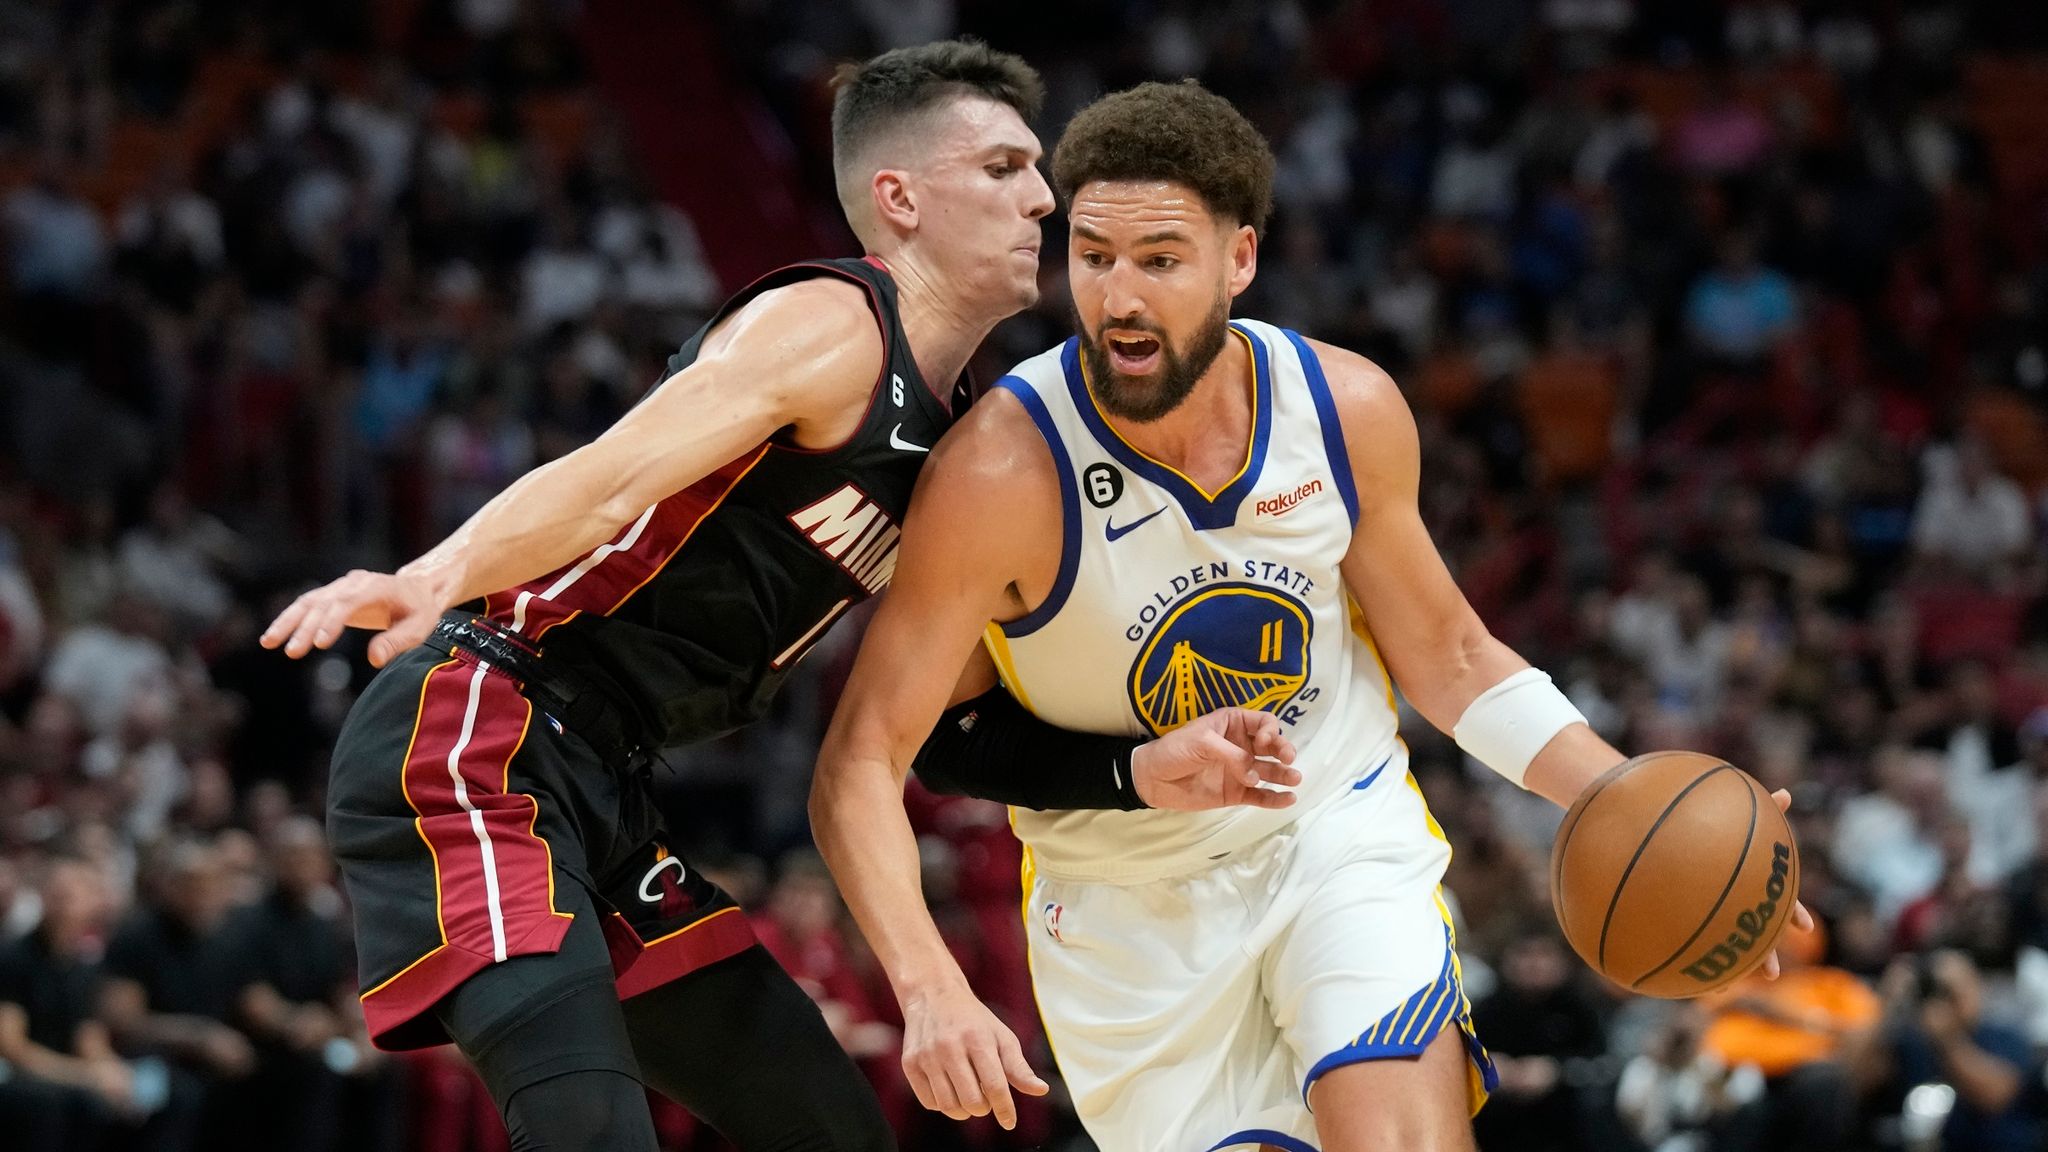 Highlights of the Golden State Warriors' visit to the Miami Heat in Week 3  of the NBA season.